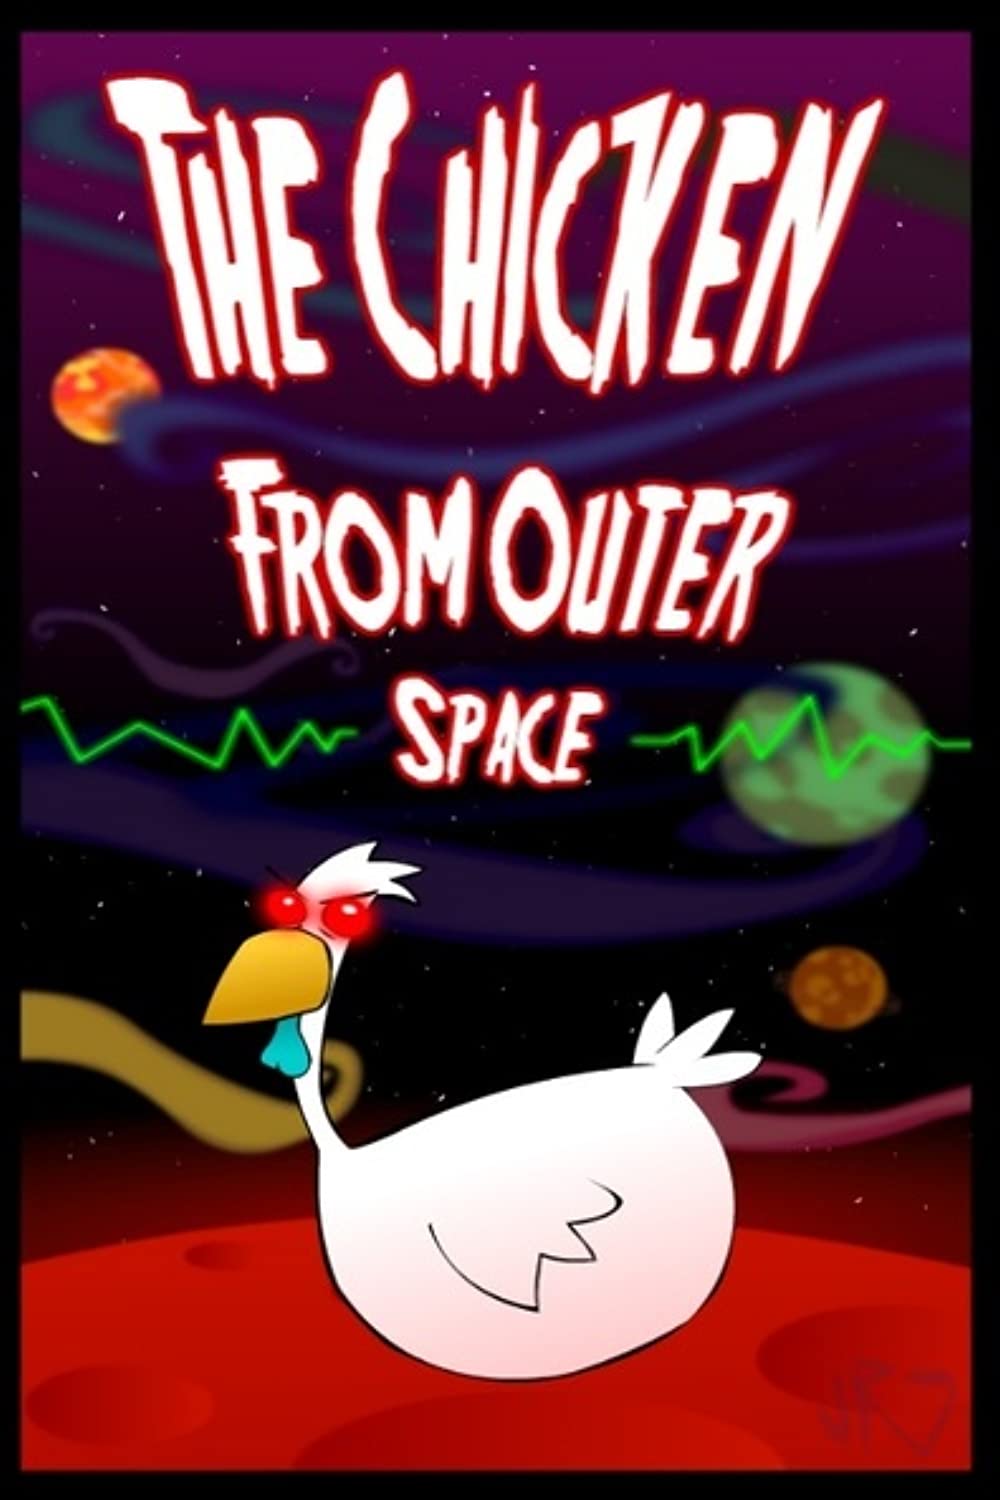 The Chicken from Outer Space (Short 1996)